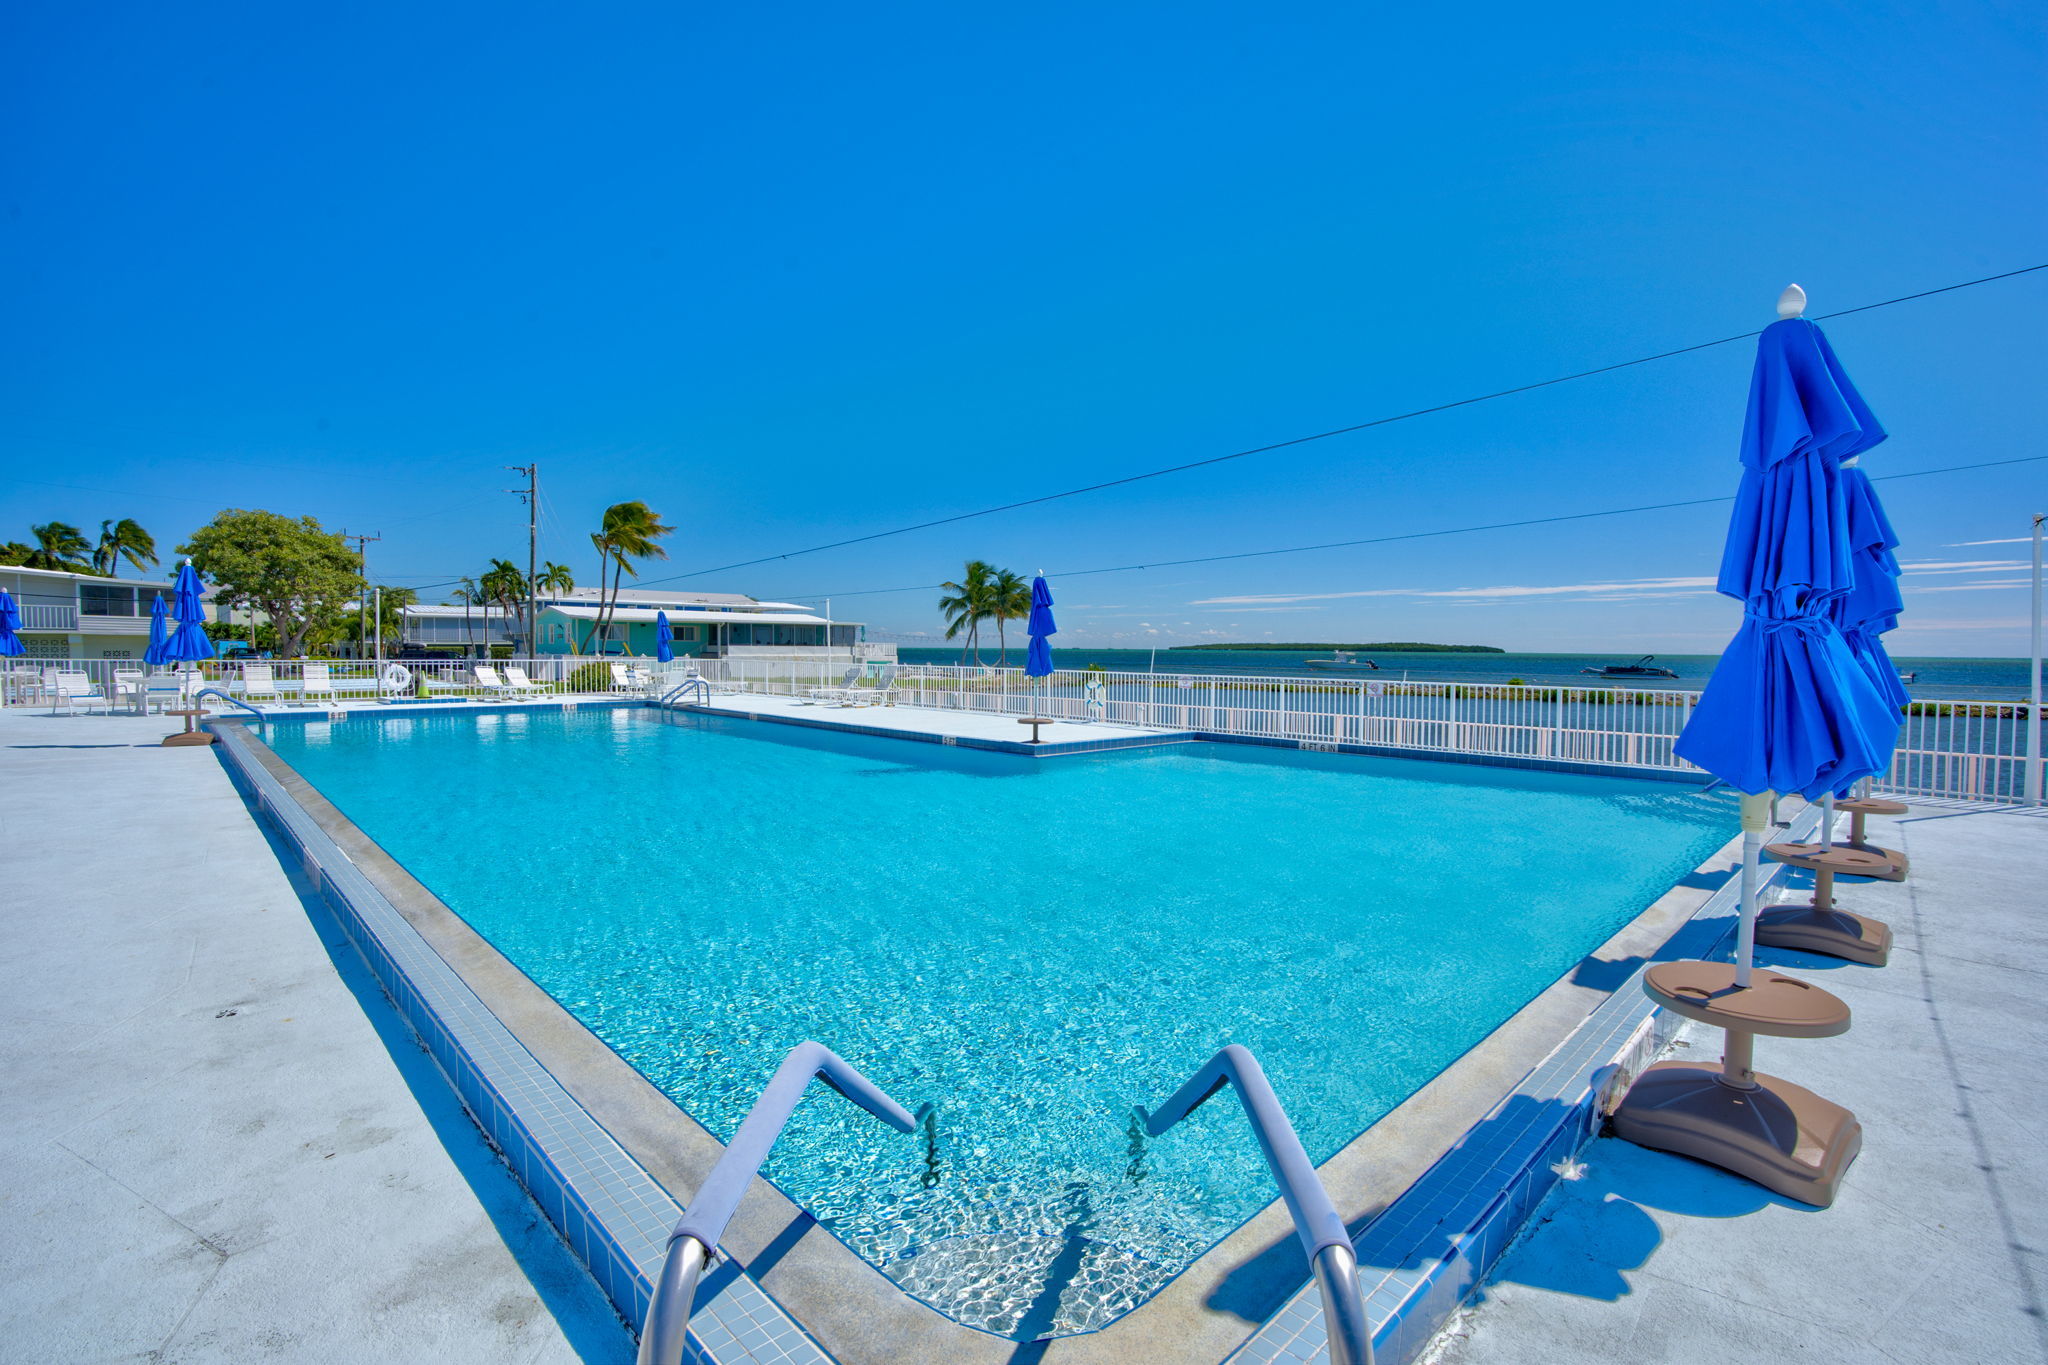 Oceanfront pool offering panoramic views of the sparkling sea, ideal for resort-style living in the Florida Keys.